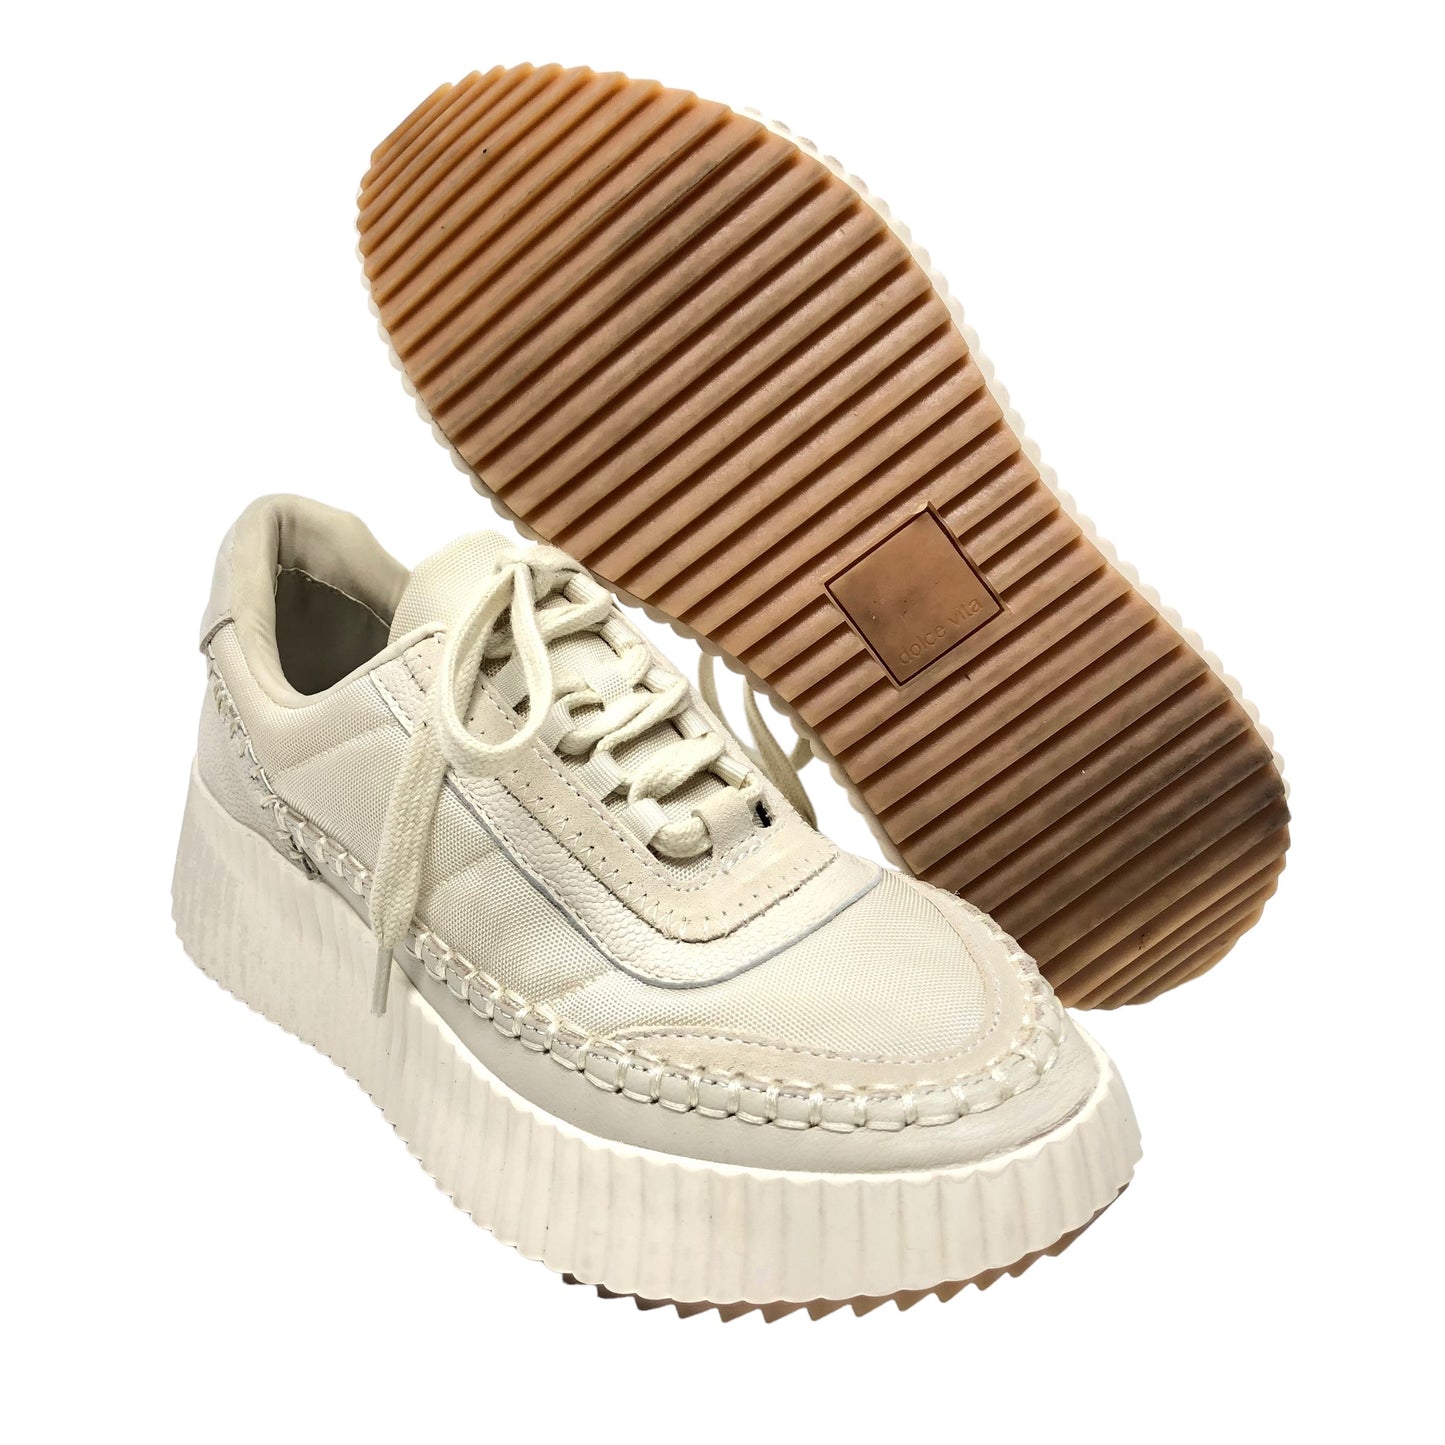 Cream Shoes Sneakers Dolce Vita, Size 8